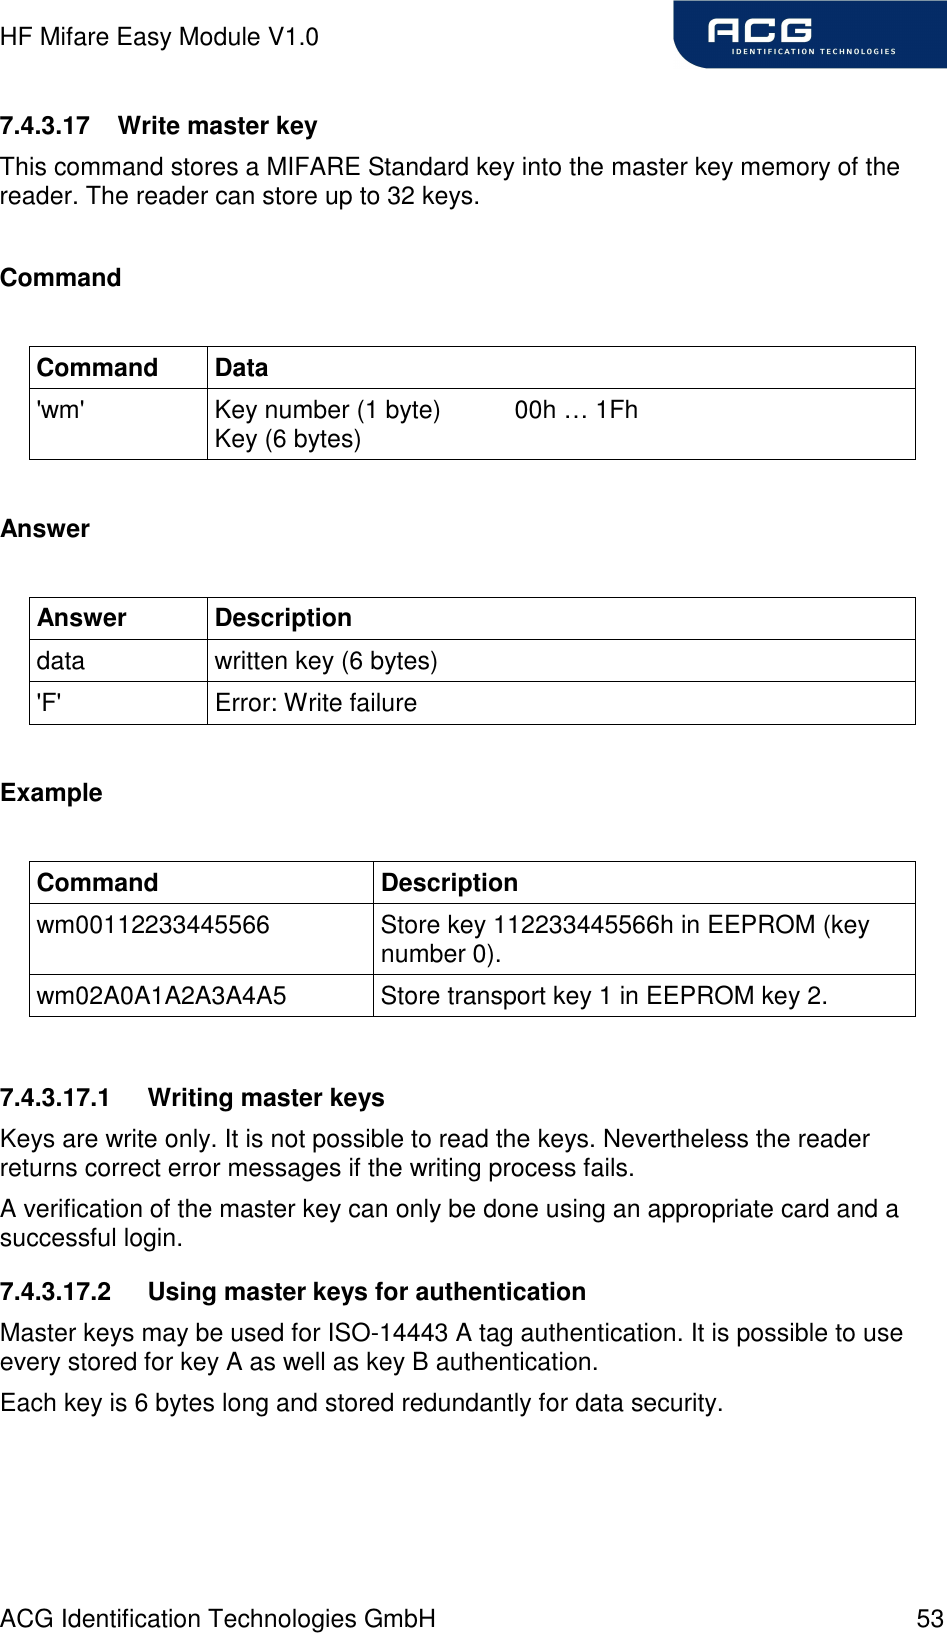 HF Mifare Easy Module V1.0 ACG Identification Technologies GmbH  53 7.4.3.17  Write master key This command stores a MIFARE Standard key into the master key memory of the reader. The reader can store up to 32 keys.  Command  Command  Data &apos;wm&apos;  Key number (1 byte)  00h … 1Fh Key (6 bytes)  Answer  Answer  Description data  written key (6 bytes) &apos;F&apos;  Error: Write failure  Example  Command  Description wm00112233445566  Store key 112233445566h in EEPROM (key number 0). wm02A0A1A2A3A4A5  Store transport key 1 in EEPROM key 2.  7.4.3.17.1  Writing master keys Keys are write only. It is not possible to read the keys. Nevertheless the reader returns correct error messages if the writing process fails. A verification of the master key can only be done using an appropriate card and a successful login. 7.4.3.17.2  Using master keys for authentication Master keys may be used for ISO-14443 A tag authentication. It is possible to use every stored for key A as well as key B authentication. Each key is 6 bytes long and stored redundantly for data security.  